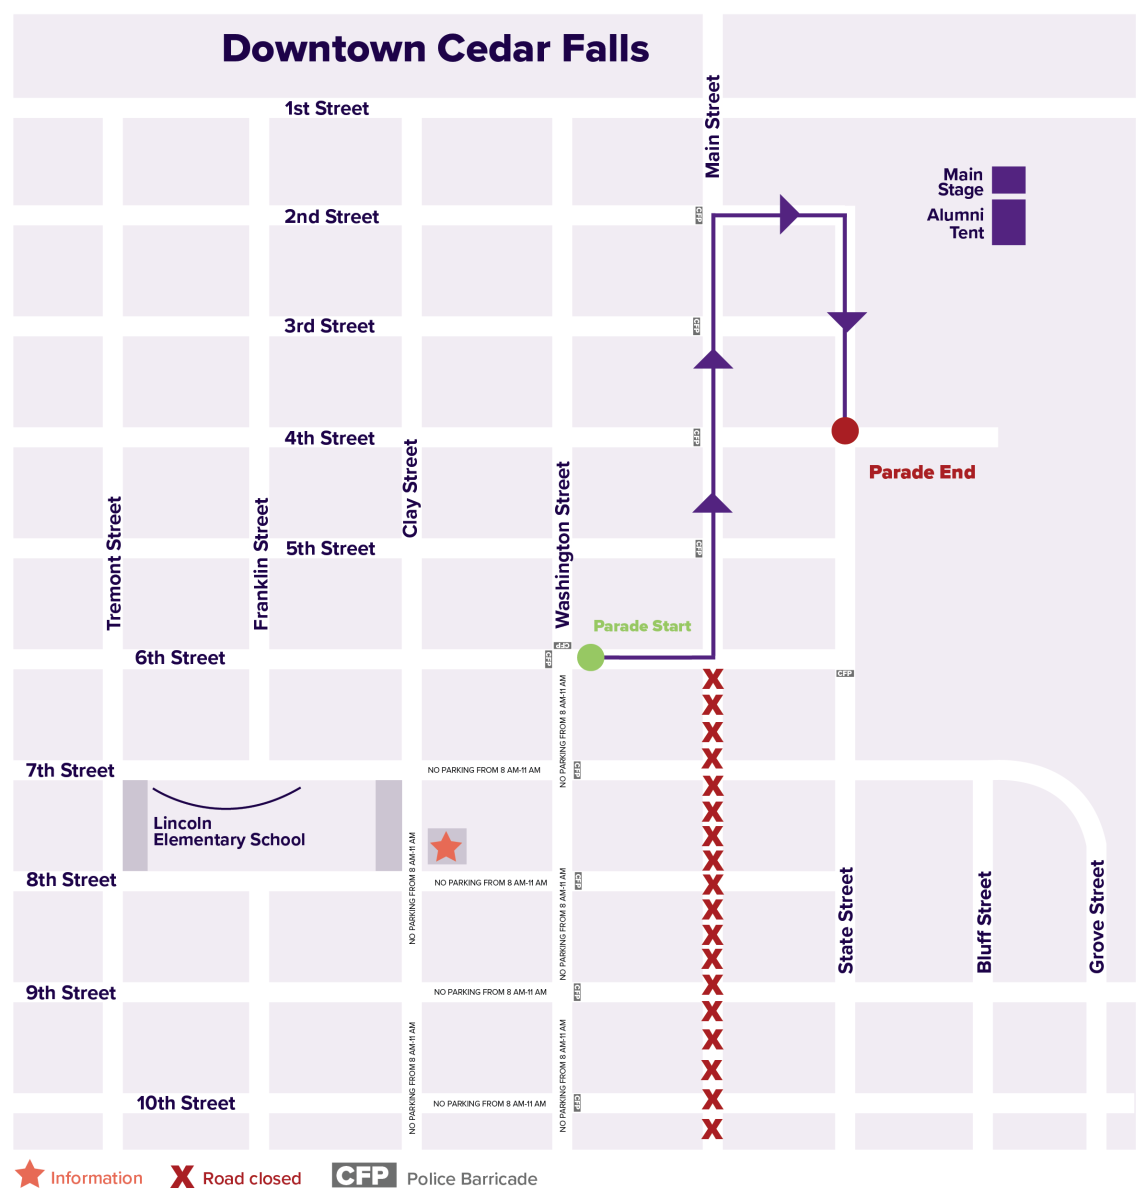 UNI Homecoming Parade route